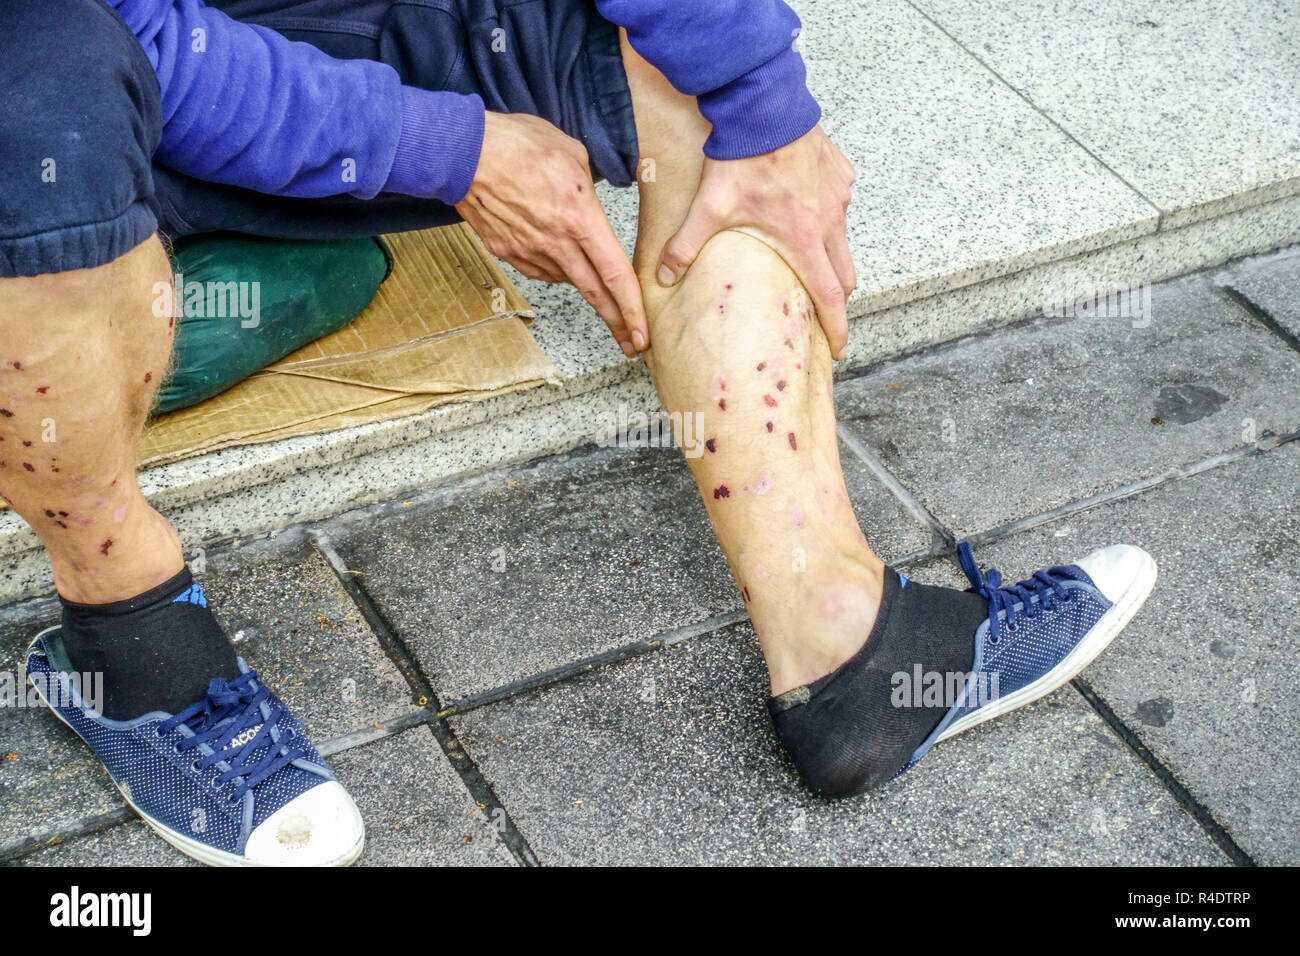 Drug addict, bloody scabs after injection on skin, legs unhealthy lifestyle Stock Photo